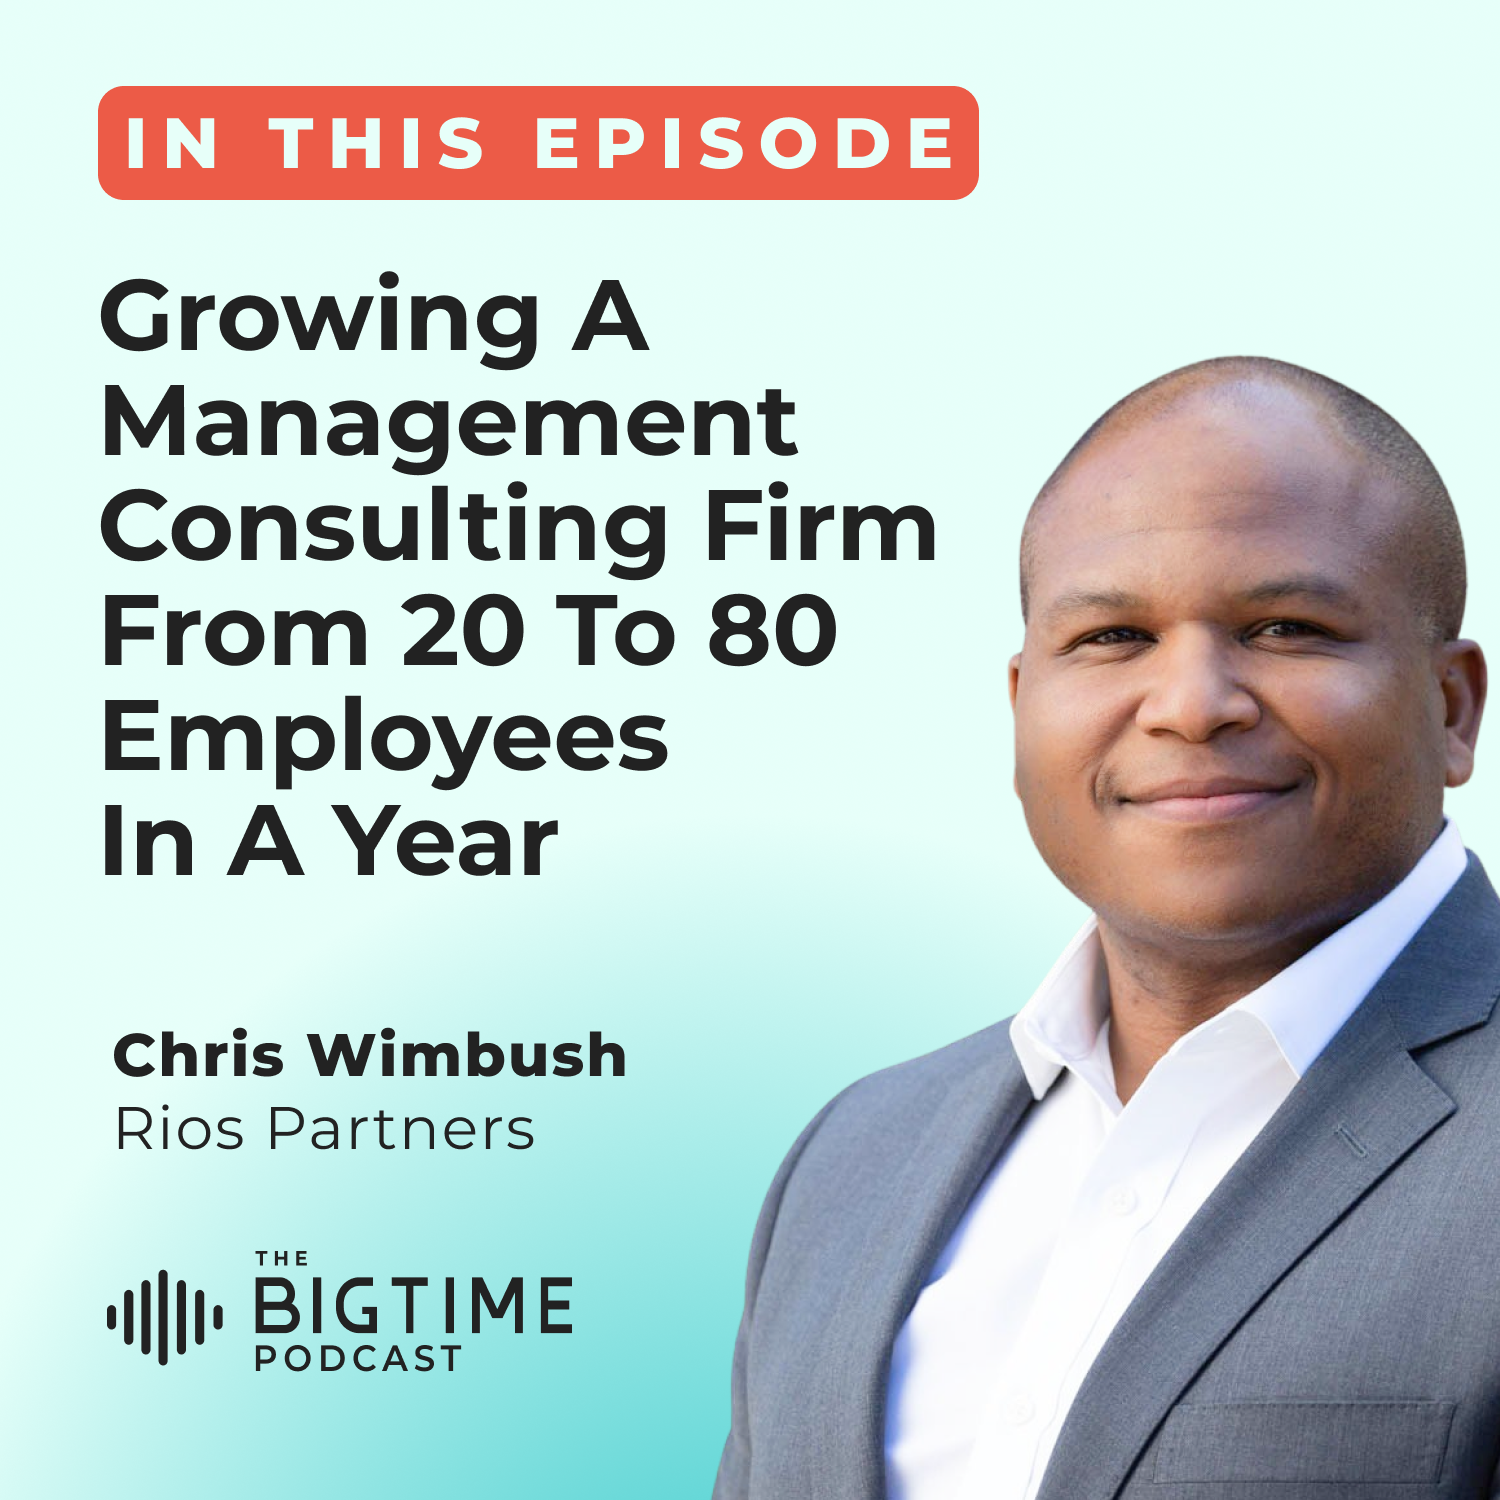 Growing a Management Consulting Firm from 20 to 80 Employees in a Year